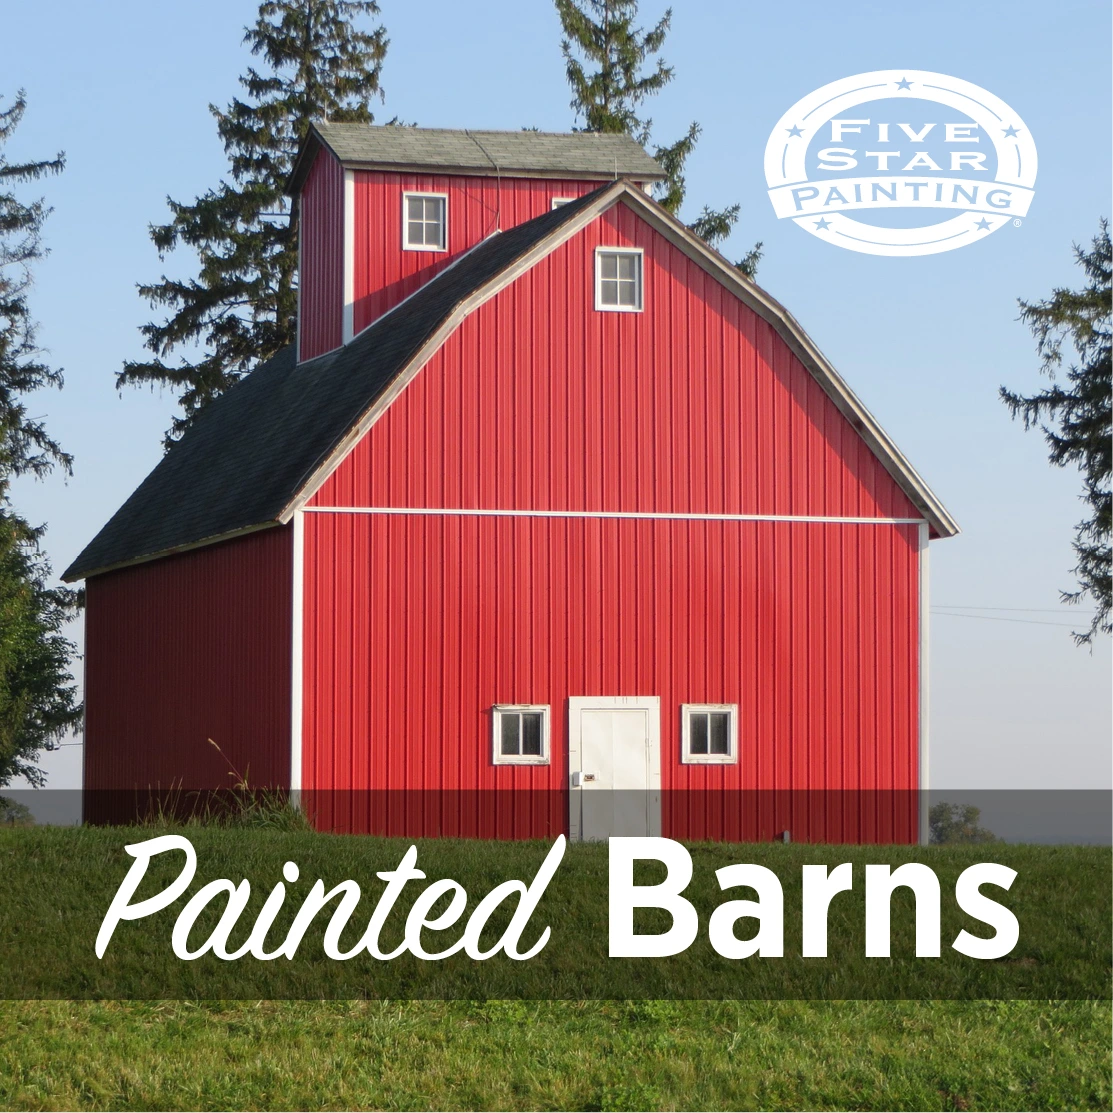 Blog title superimposed over a photo of a red barn sitting on a green lawn, Five Star Painting logo in the top right